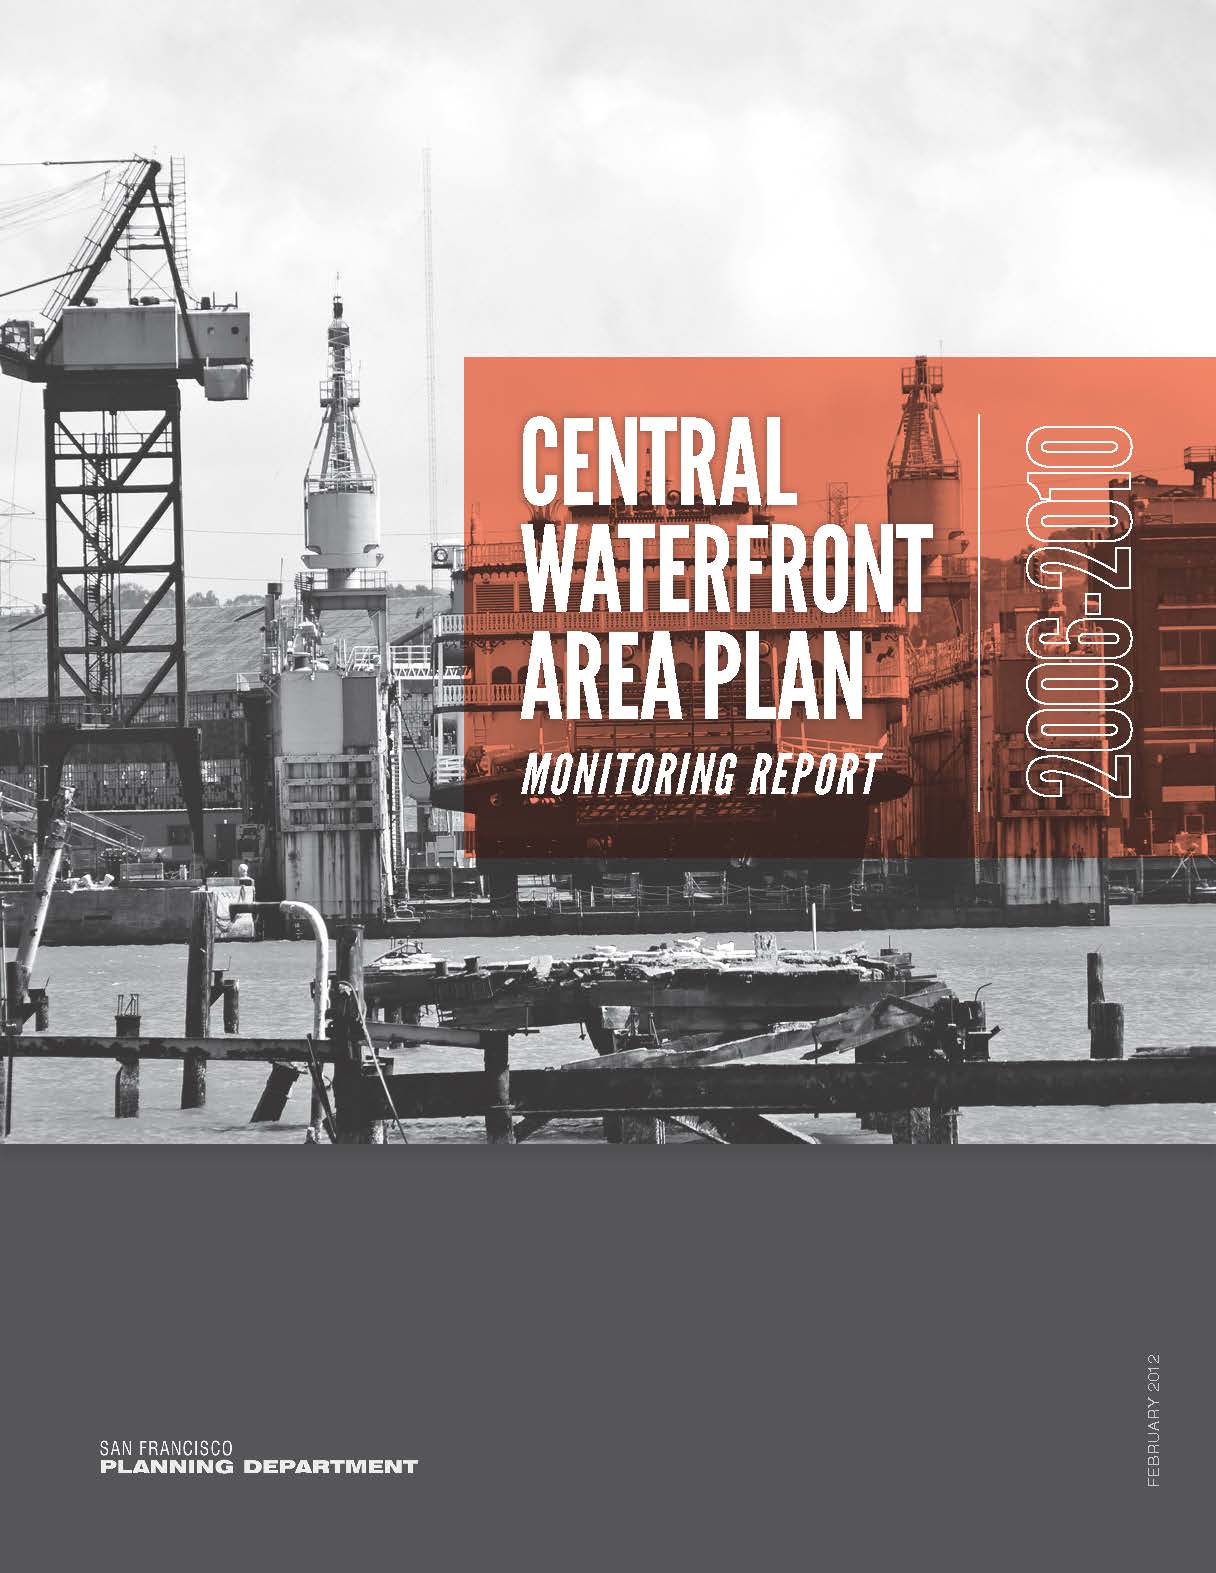 Cover Image for the Central Waterfront Area Plan Monitoring Report